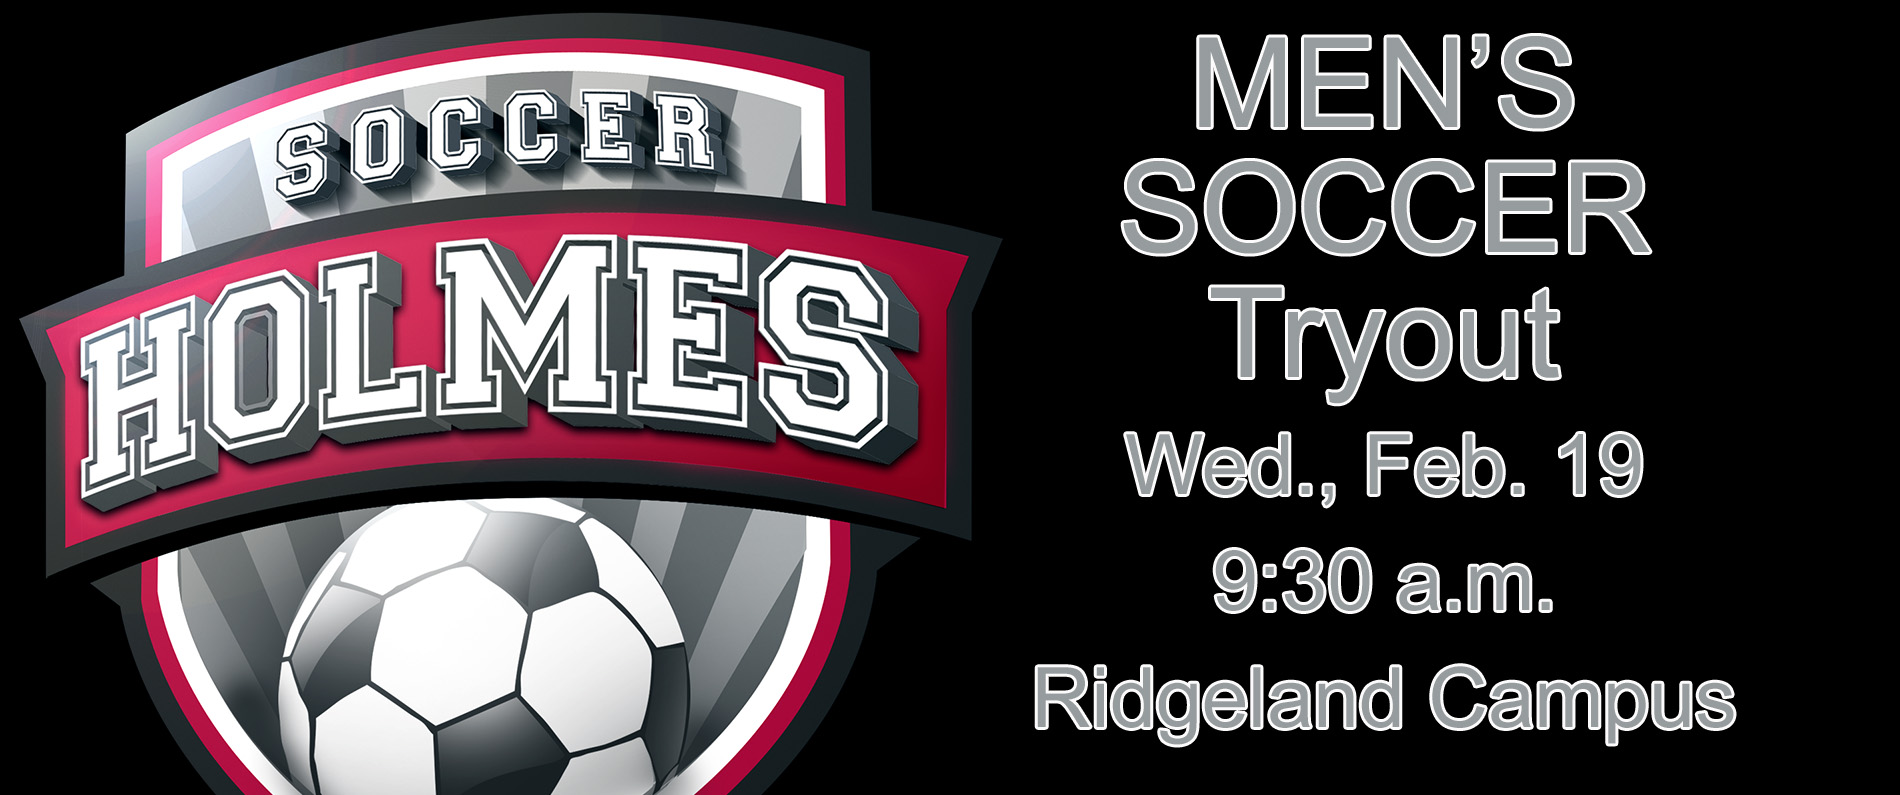 Tryout set for Wednesday, Feb. 19